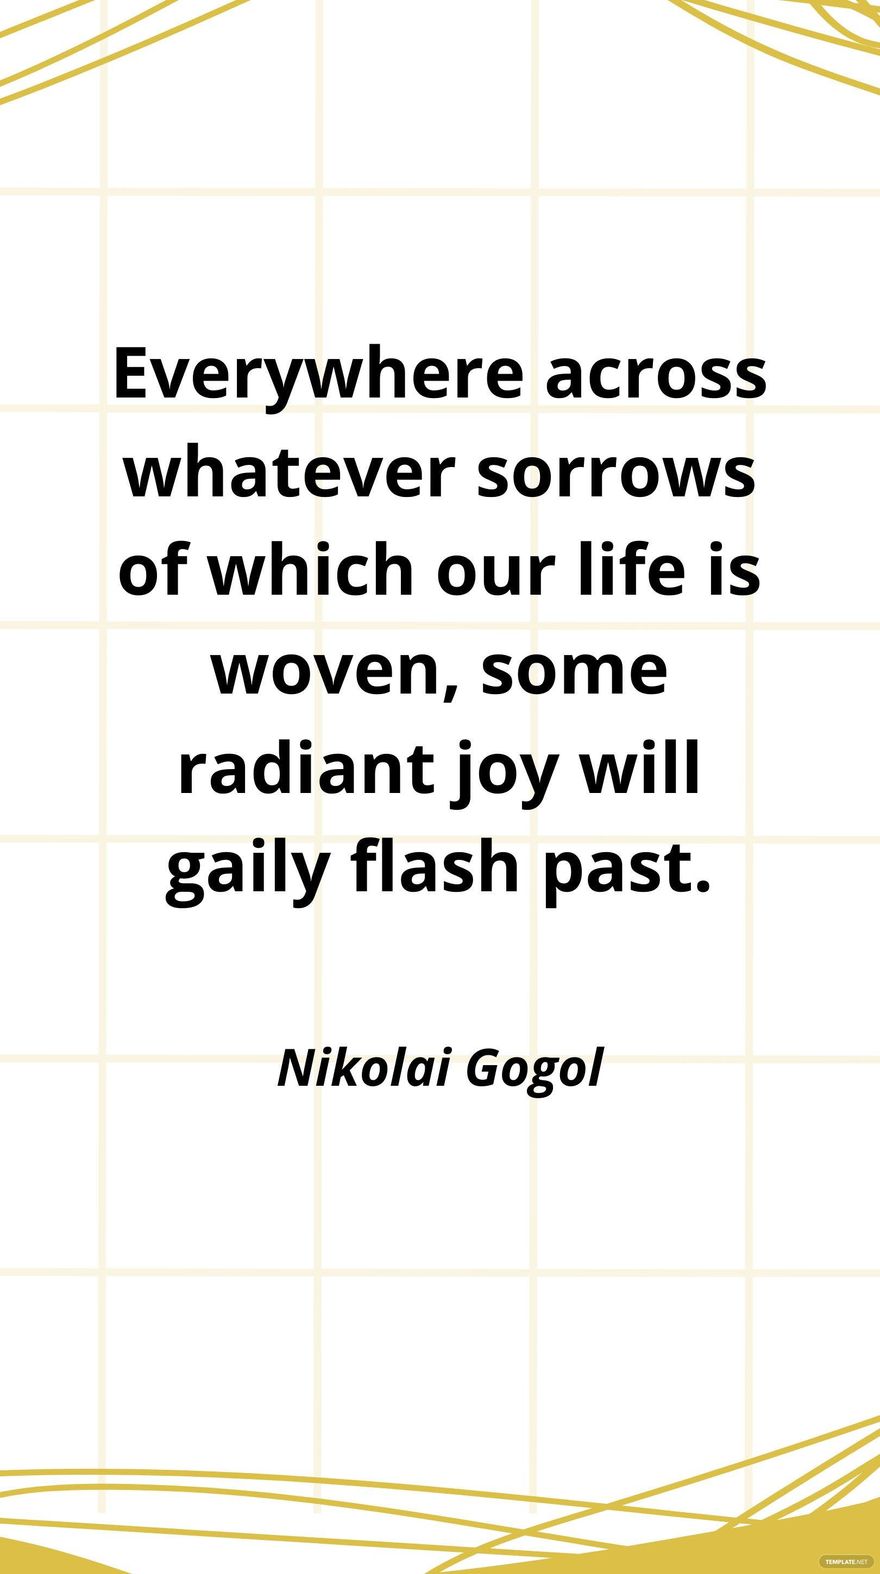 Nikolai Gogol - Everywhere across whatever sorrows of which our life is woven, some radiant joy will gaily flash past. in JPG